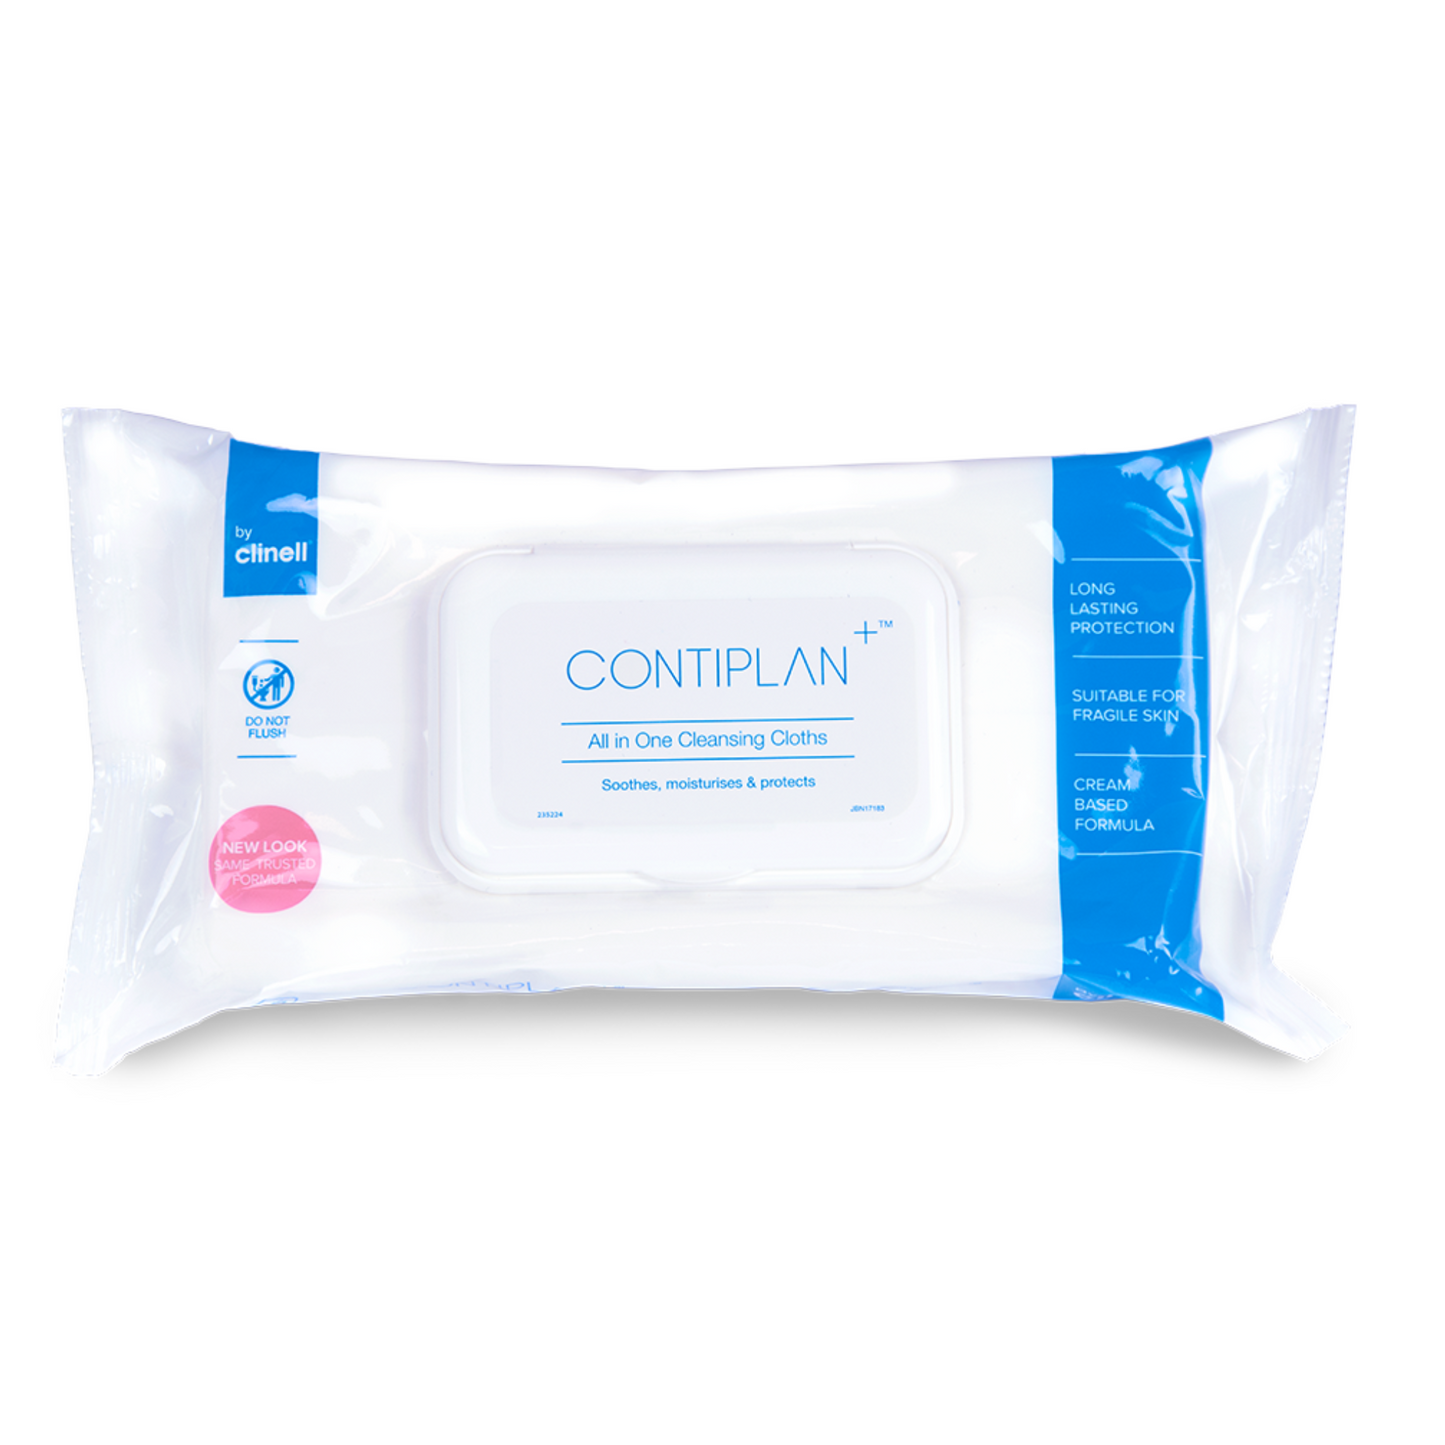 Clinell Contiplan Wipes - Pack of 25